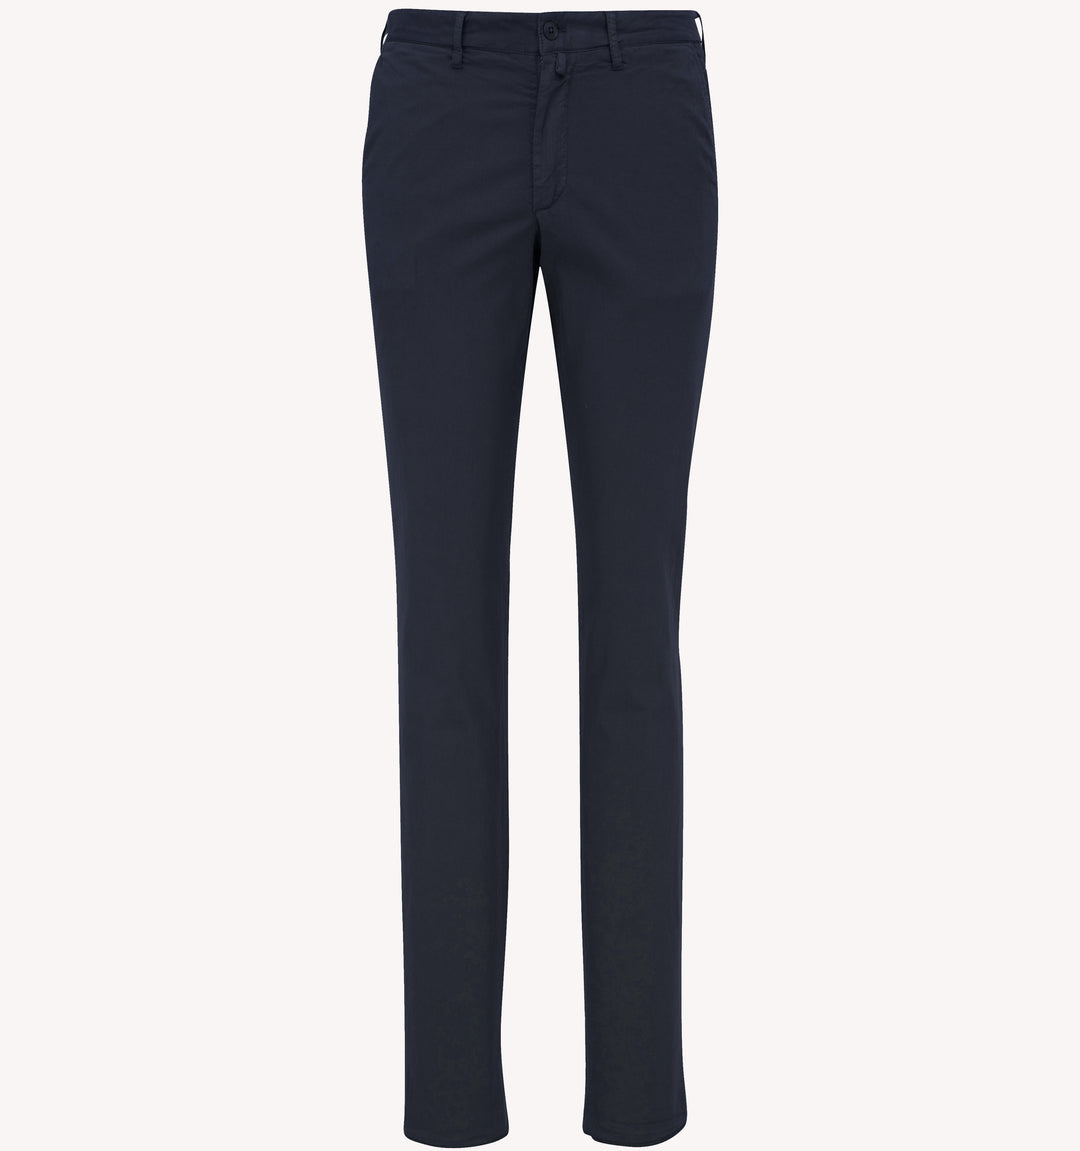 Munro Sport Trousers in Navy